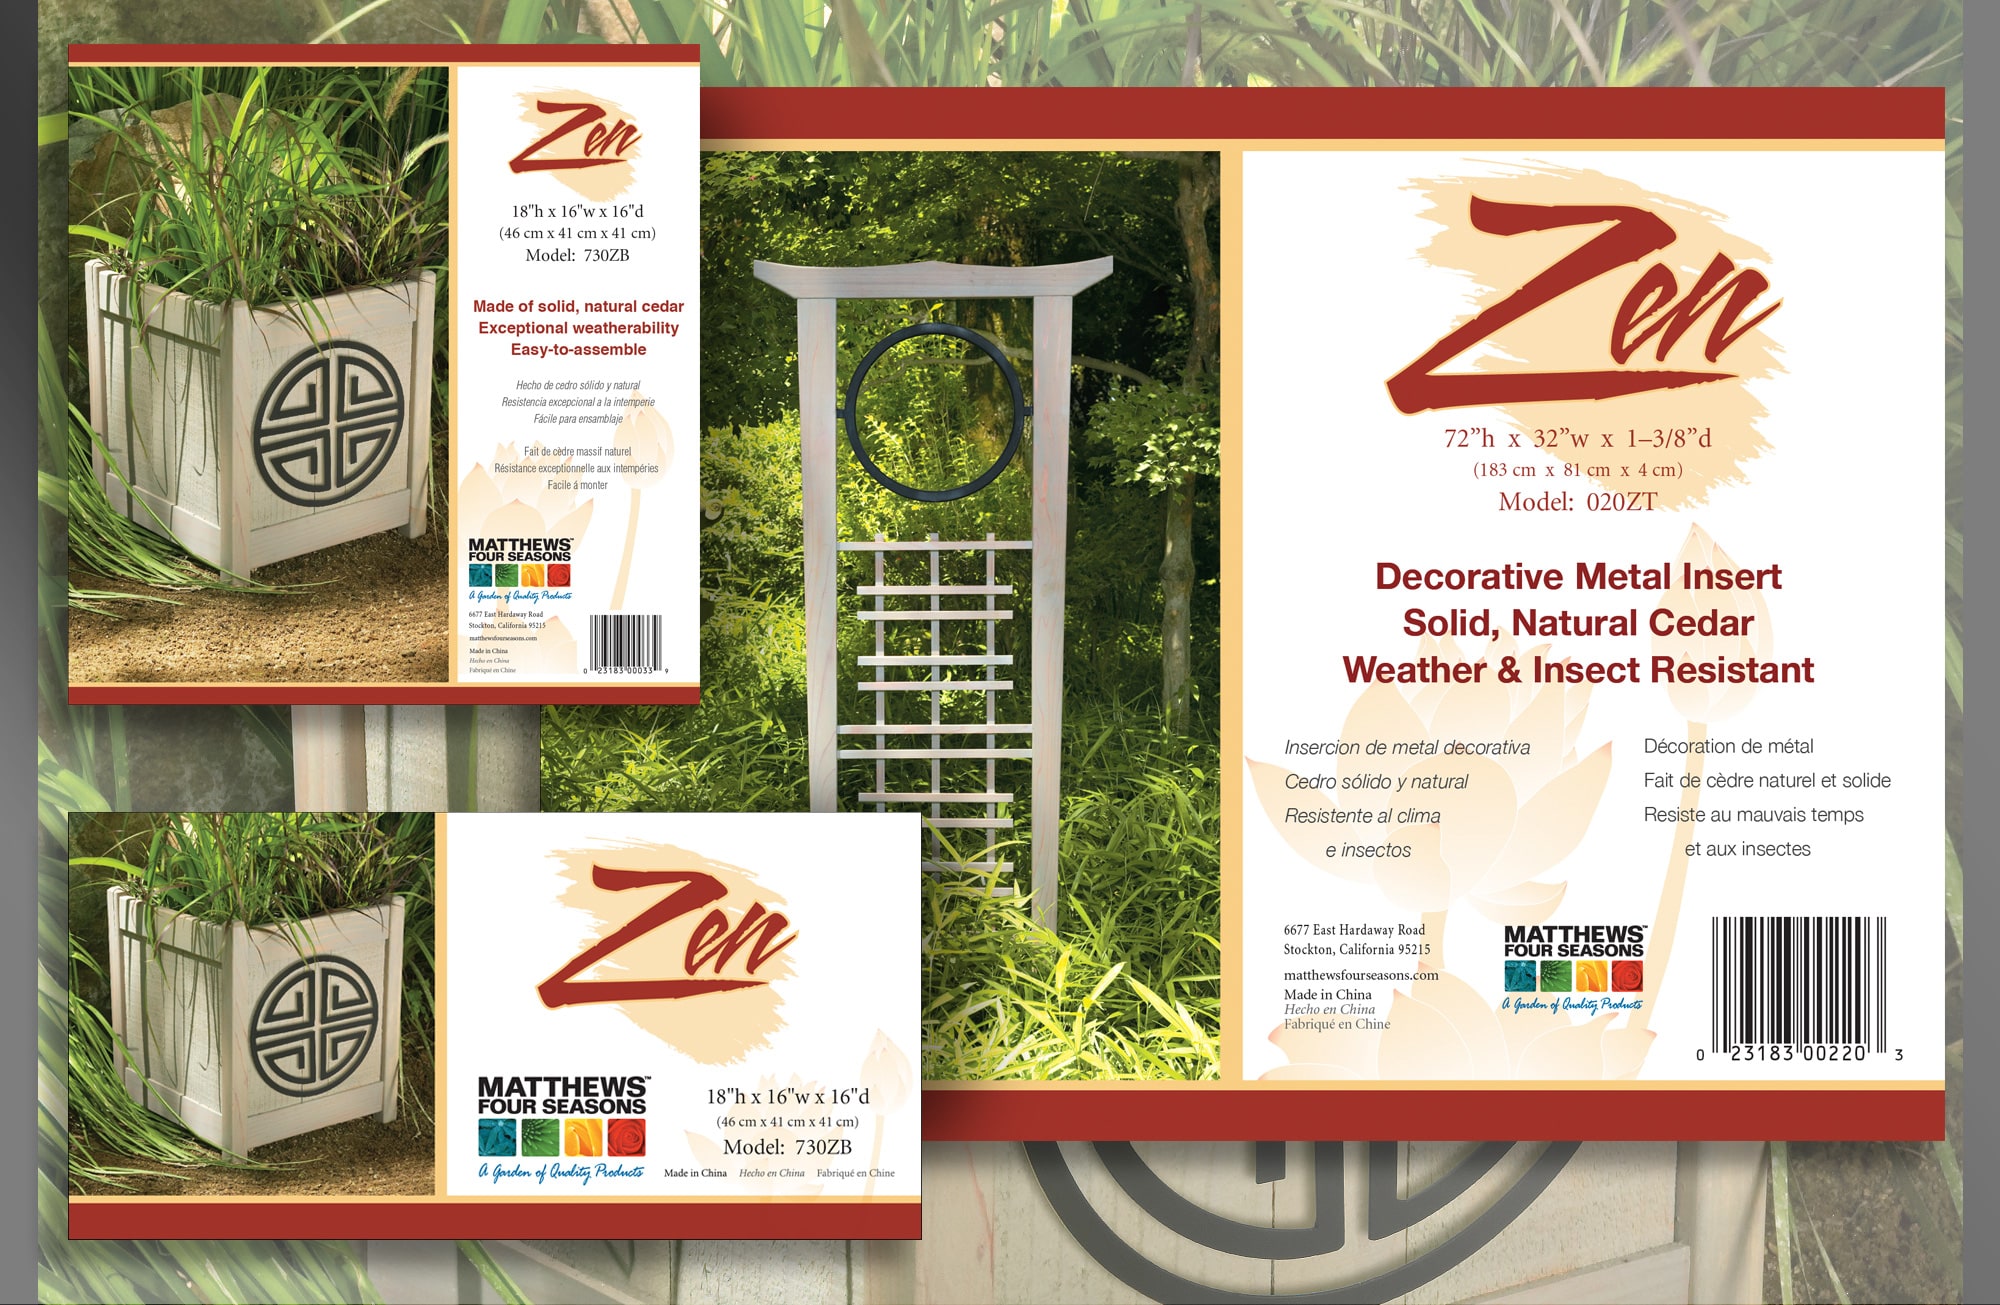  USA, Zen Brand, Collections Box and Trellis Label Packaging 